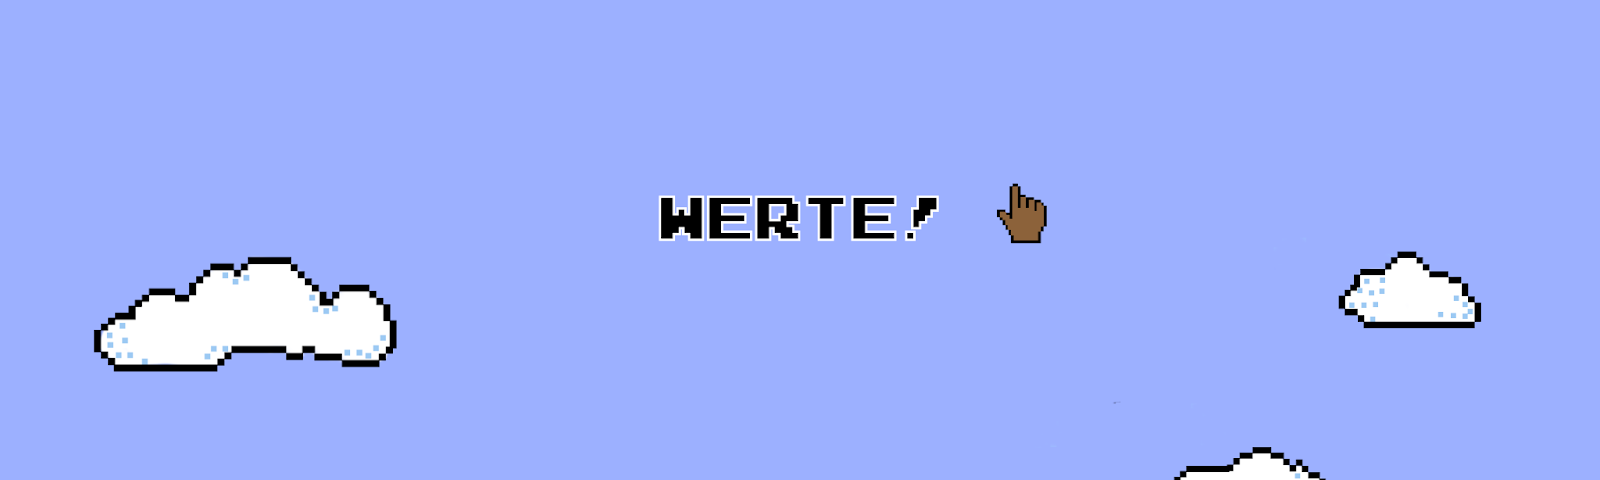 A computer graphic of a desert landscape with blue sky and clouds. In the center is the word “WERTE!” with a brown emoji hand pointing up. In the bottom left corner is the word, “ARRERNTE-KENHE APMERE.”